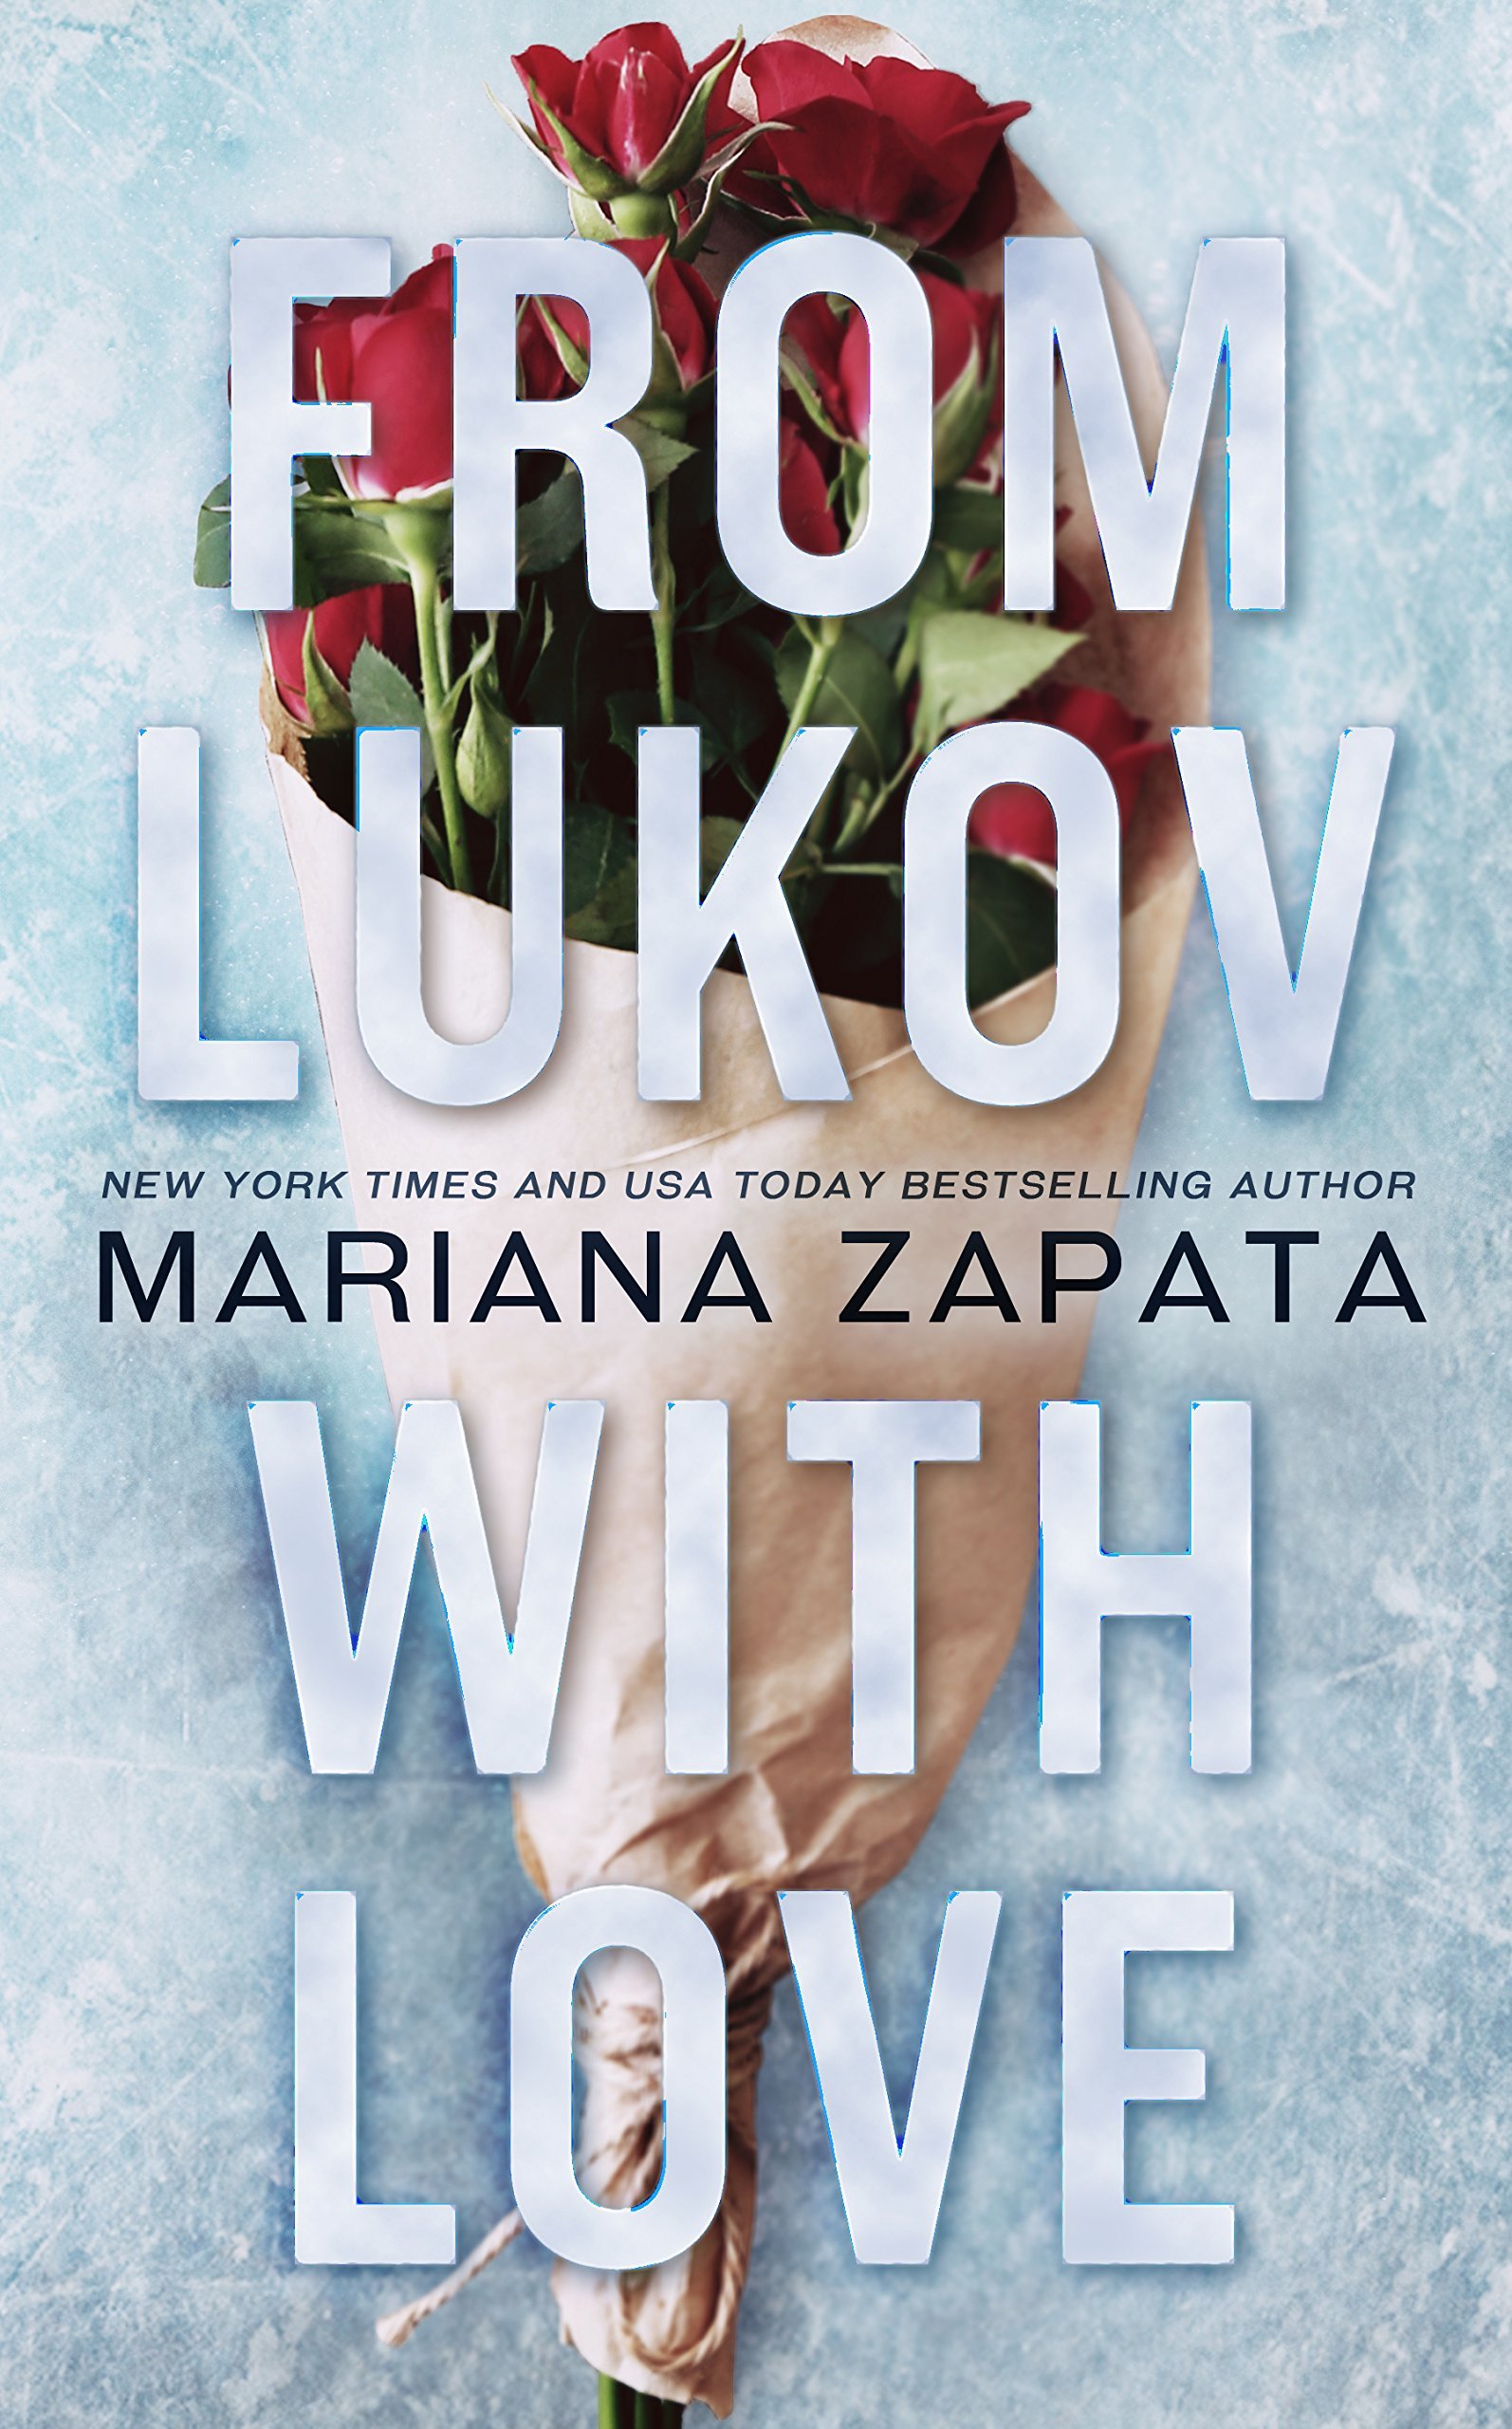 From Lukov with Love Cover